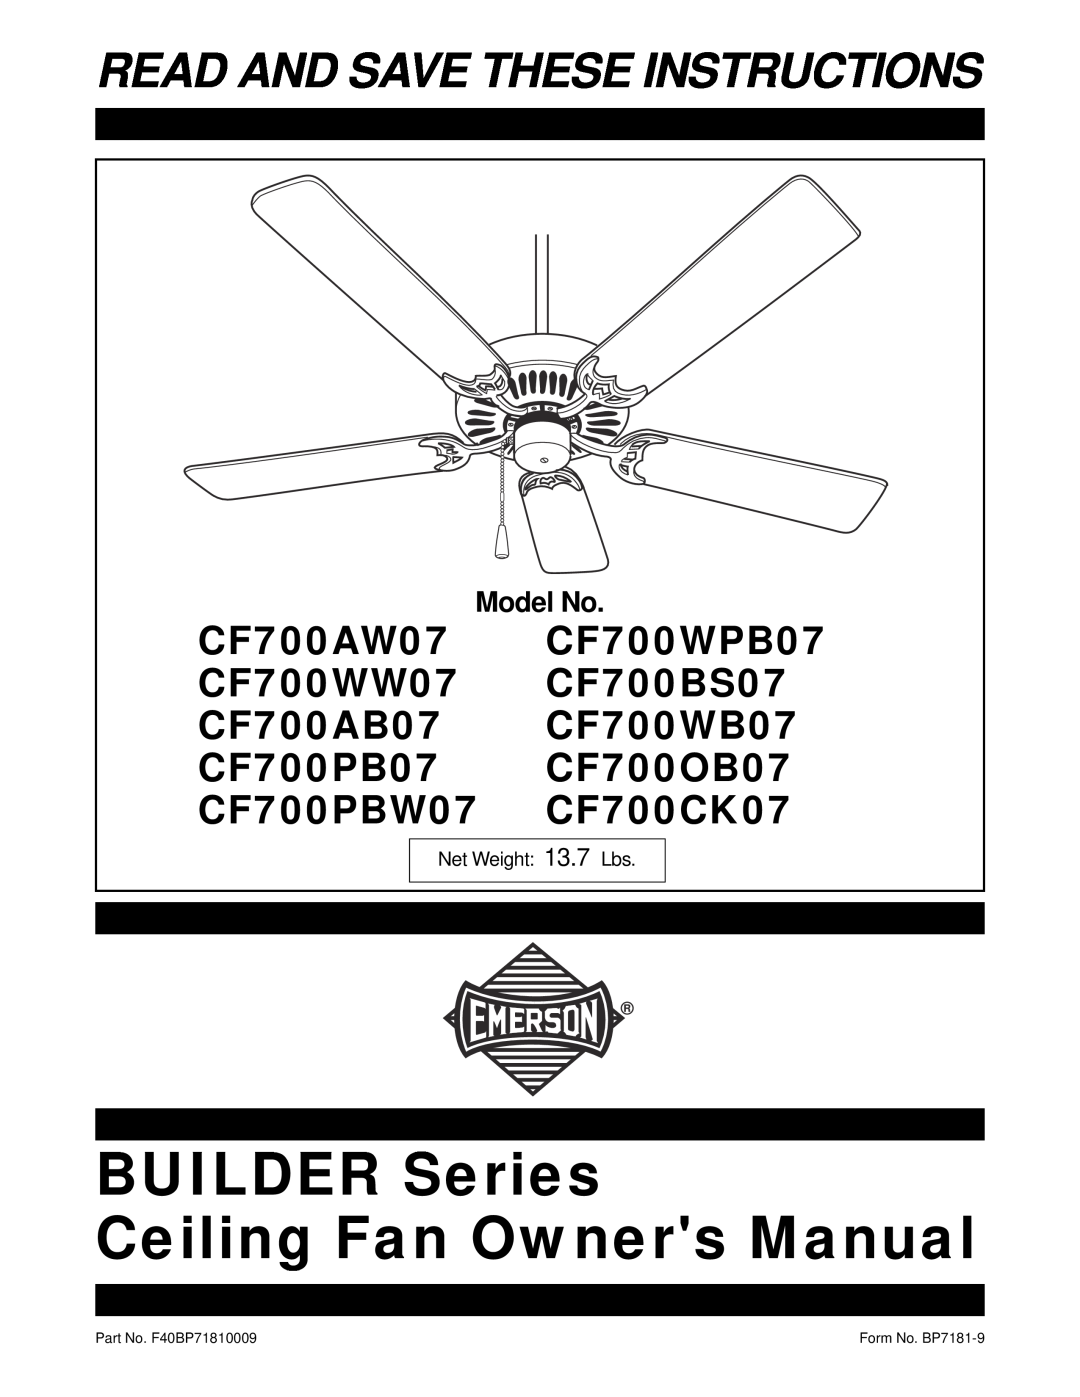 Emerson owner manual Read And Save These Instructions, CF700AW07 CF700WPB07 CF700WW07 CF700BS07, CF700PBW07 CF700CK07 